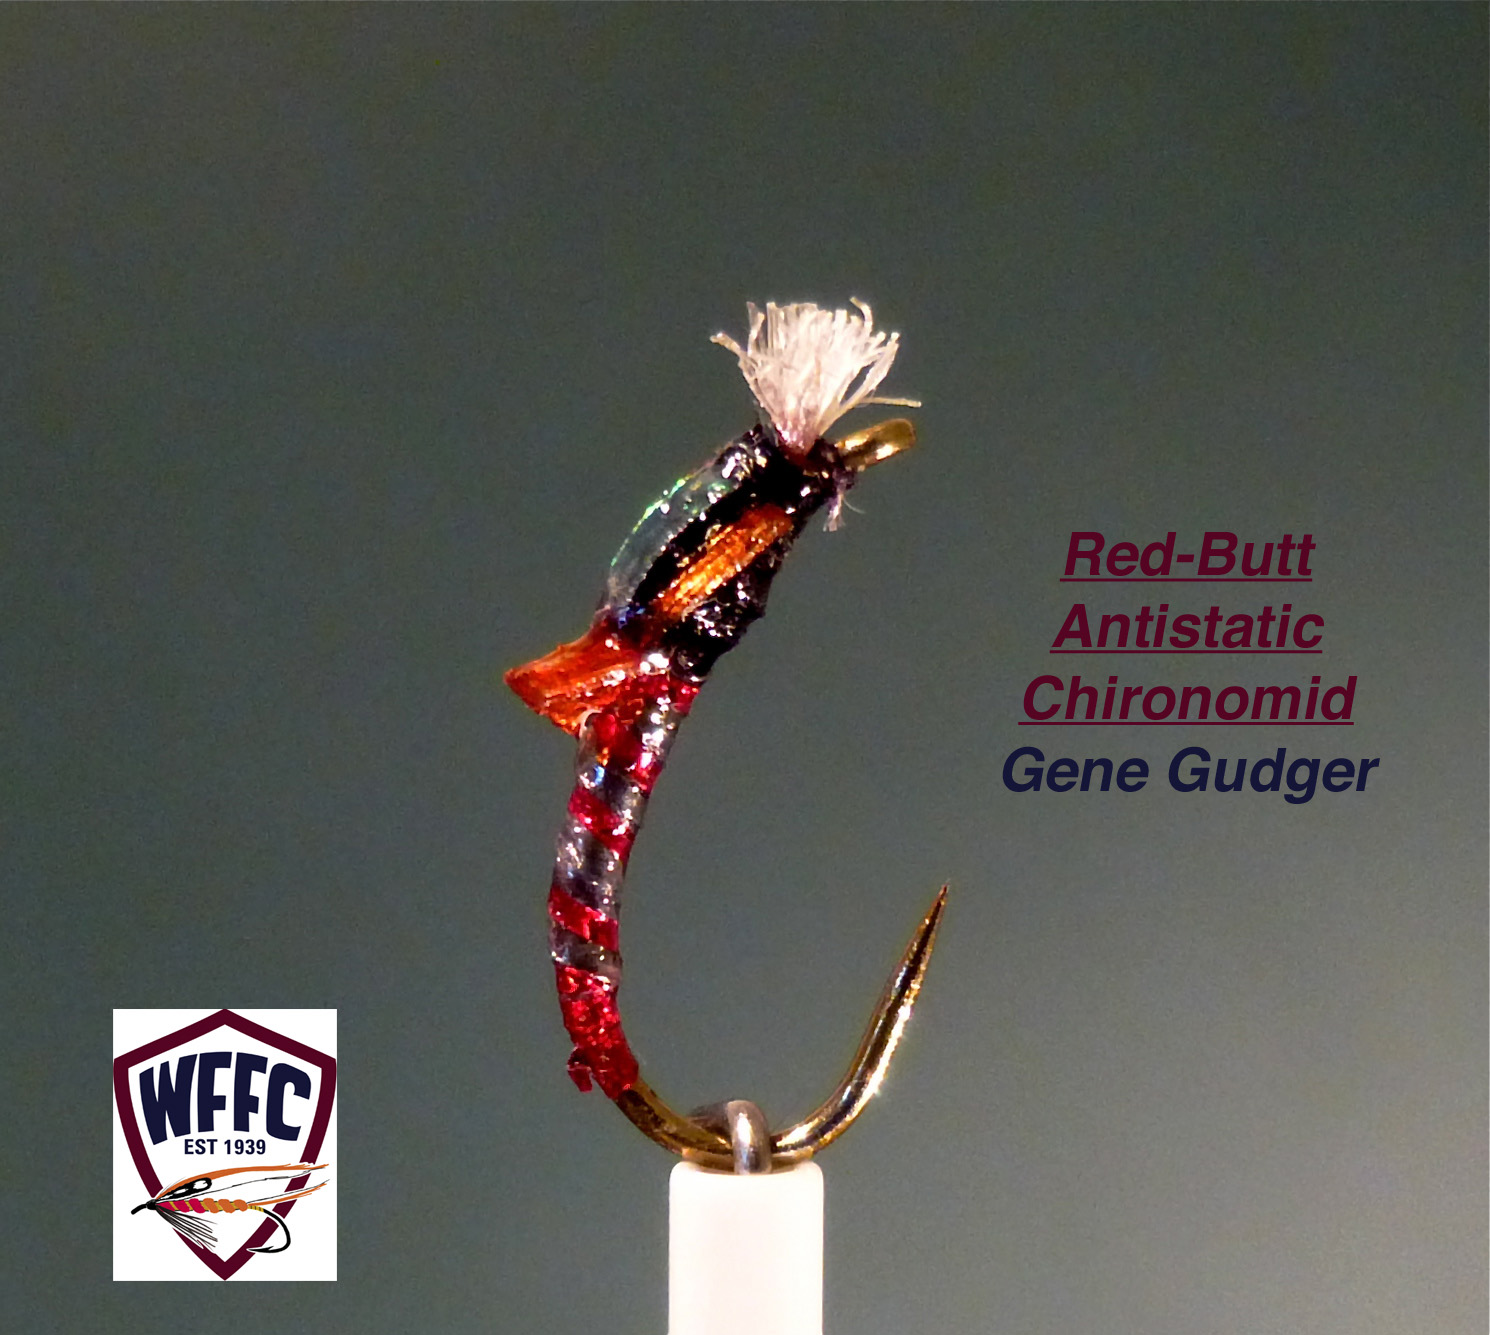 Red-Butt Antistatic Chironomid